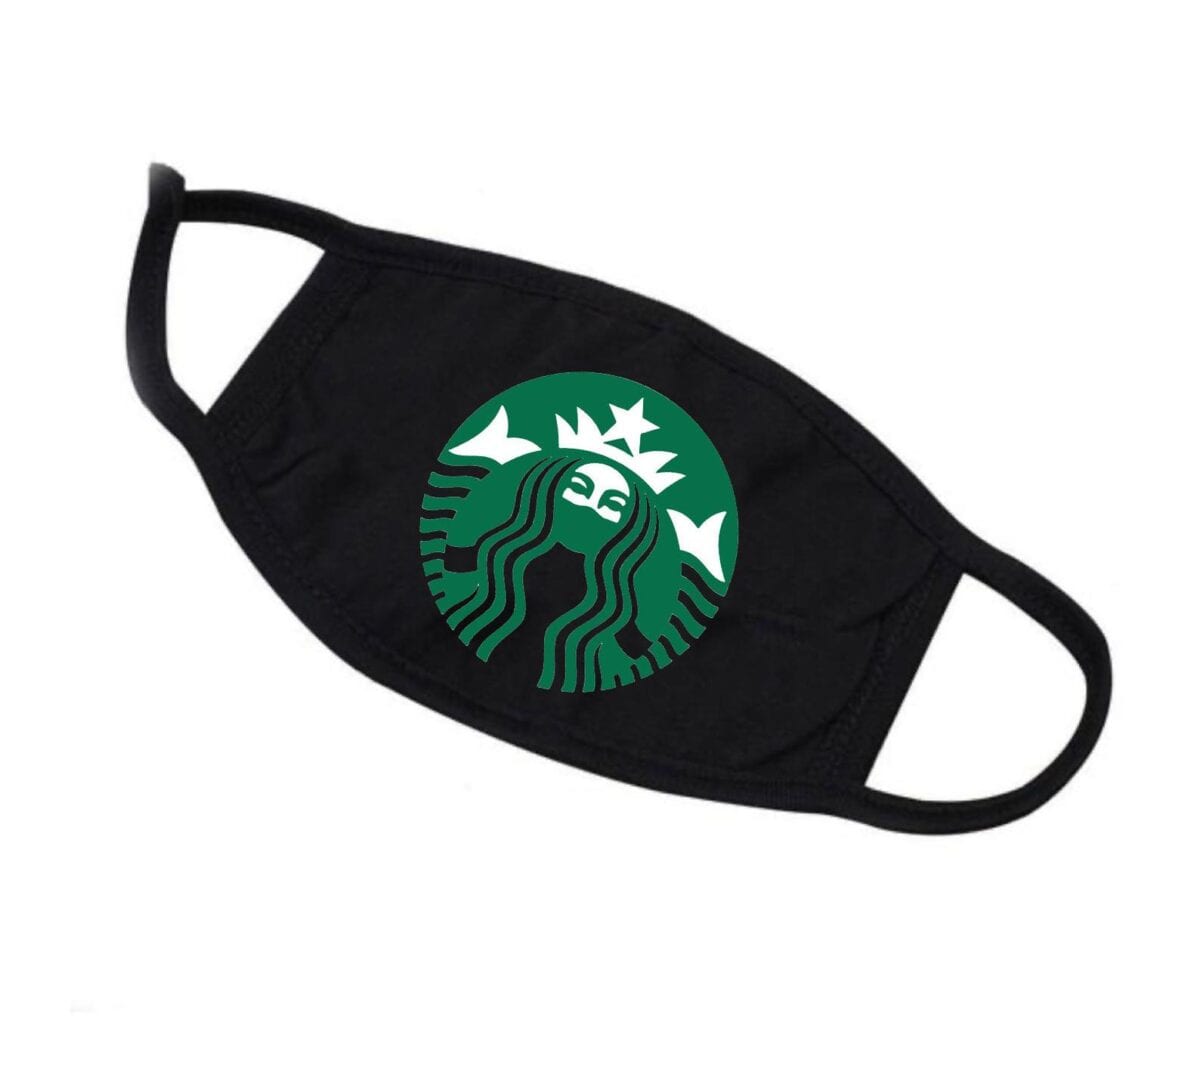 You Can Get A Starbucks Inspired Face Mask For The Person Who Loves Coffee